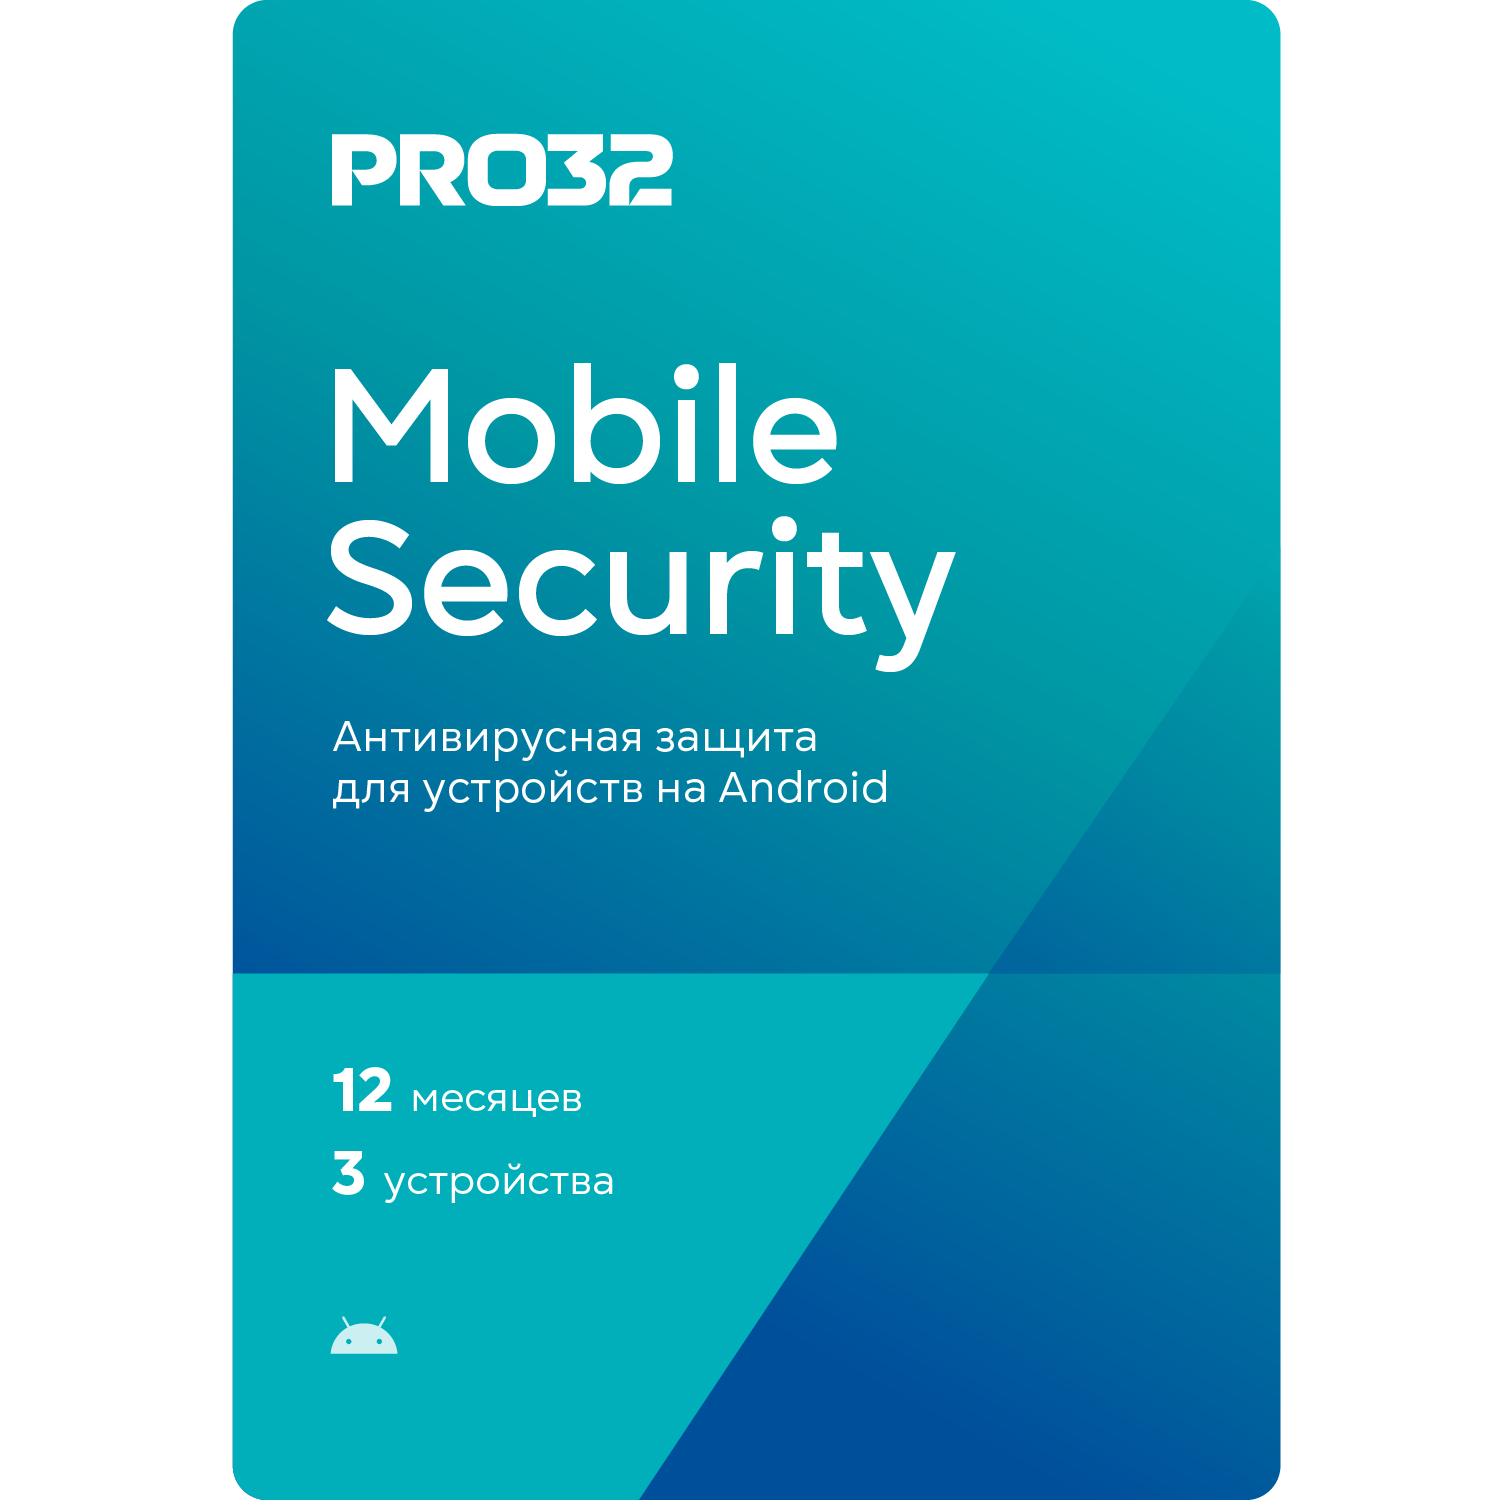 PRO 32 Mobile Security